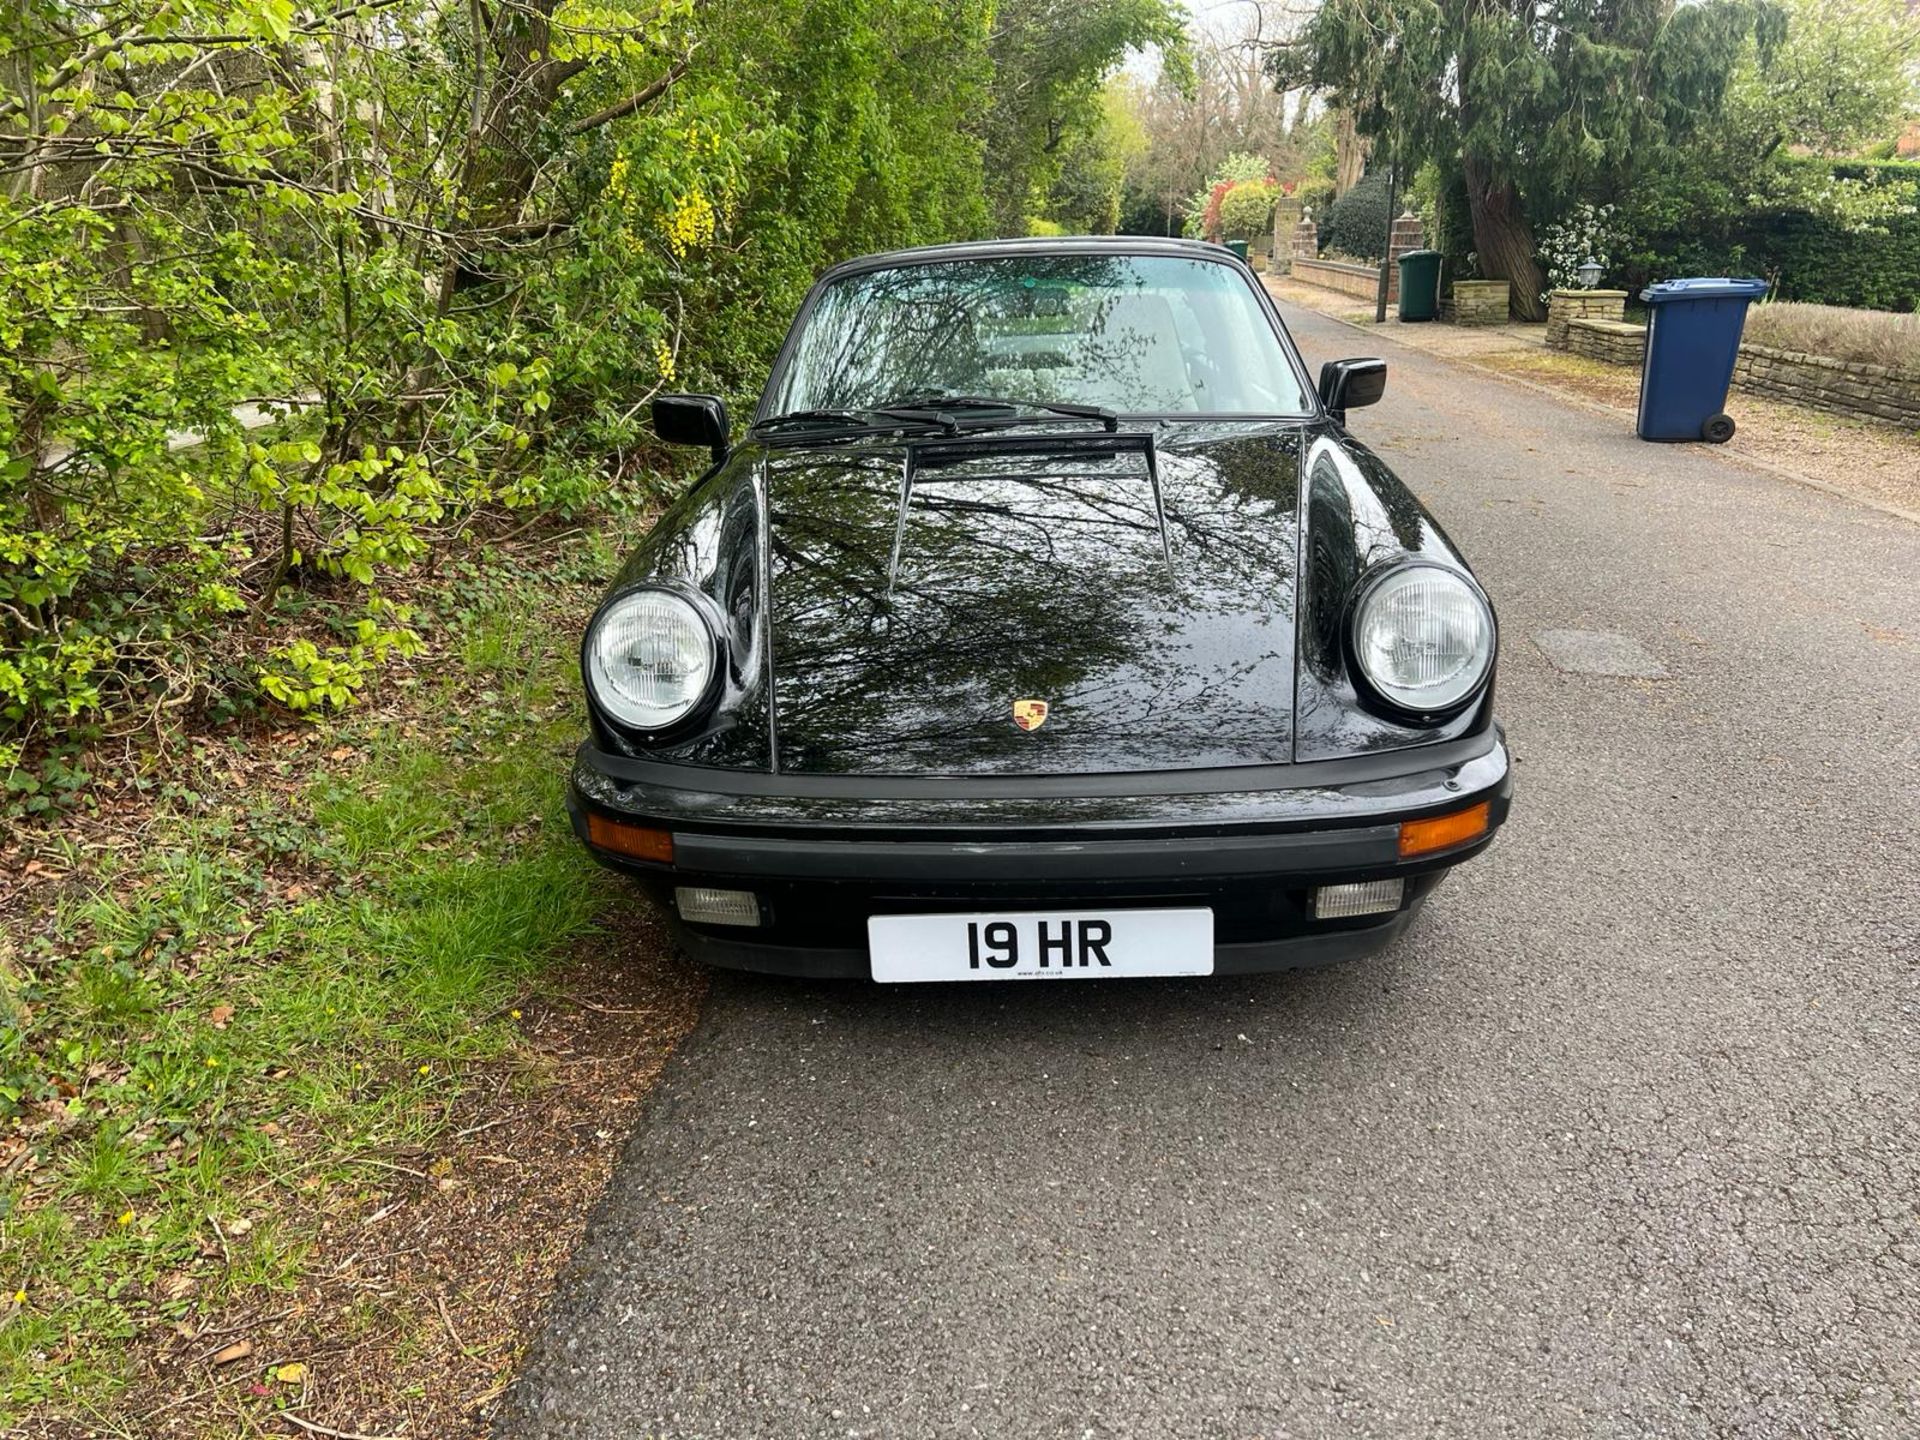 1988 Porsche Carrera Targa 3.2 - 61,000 miles of which only 3500 in past 25 years with current owner - Image 3 of 15